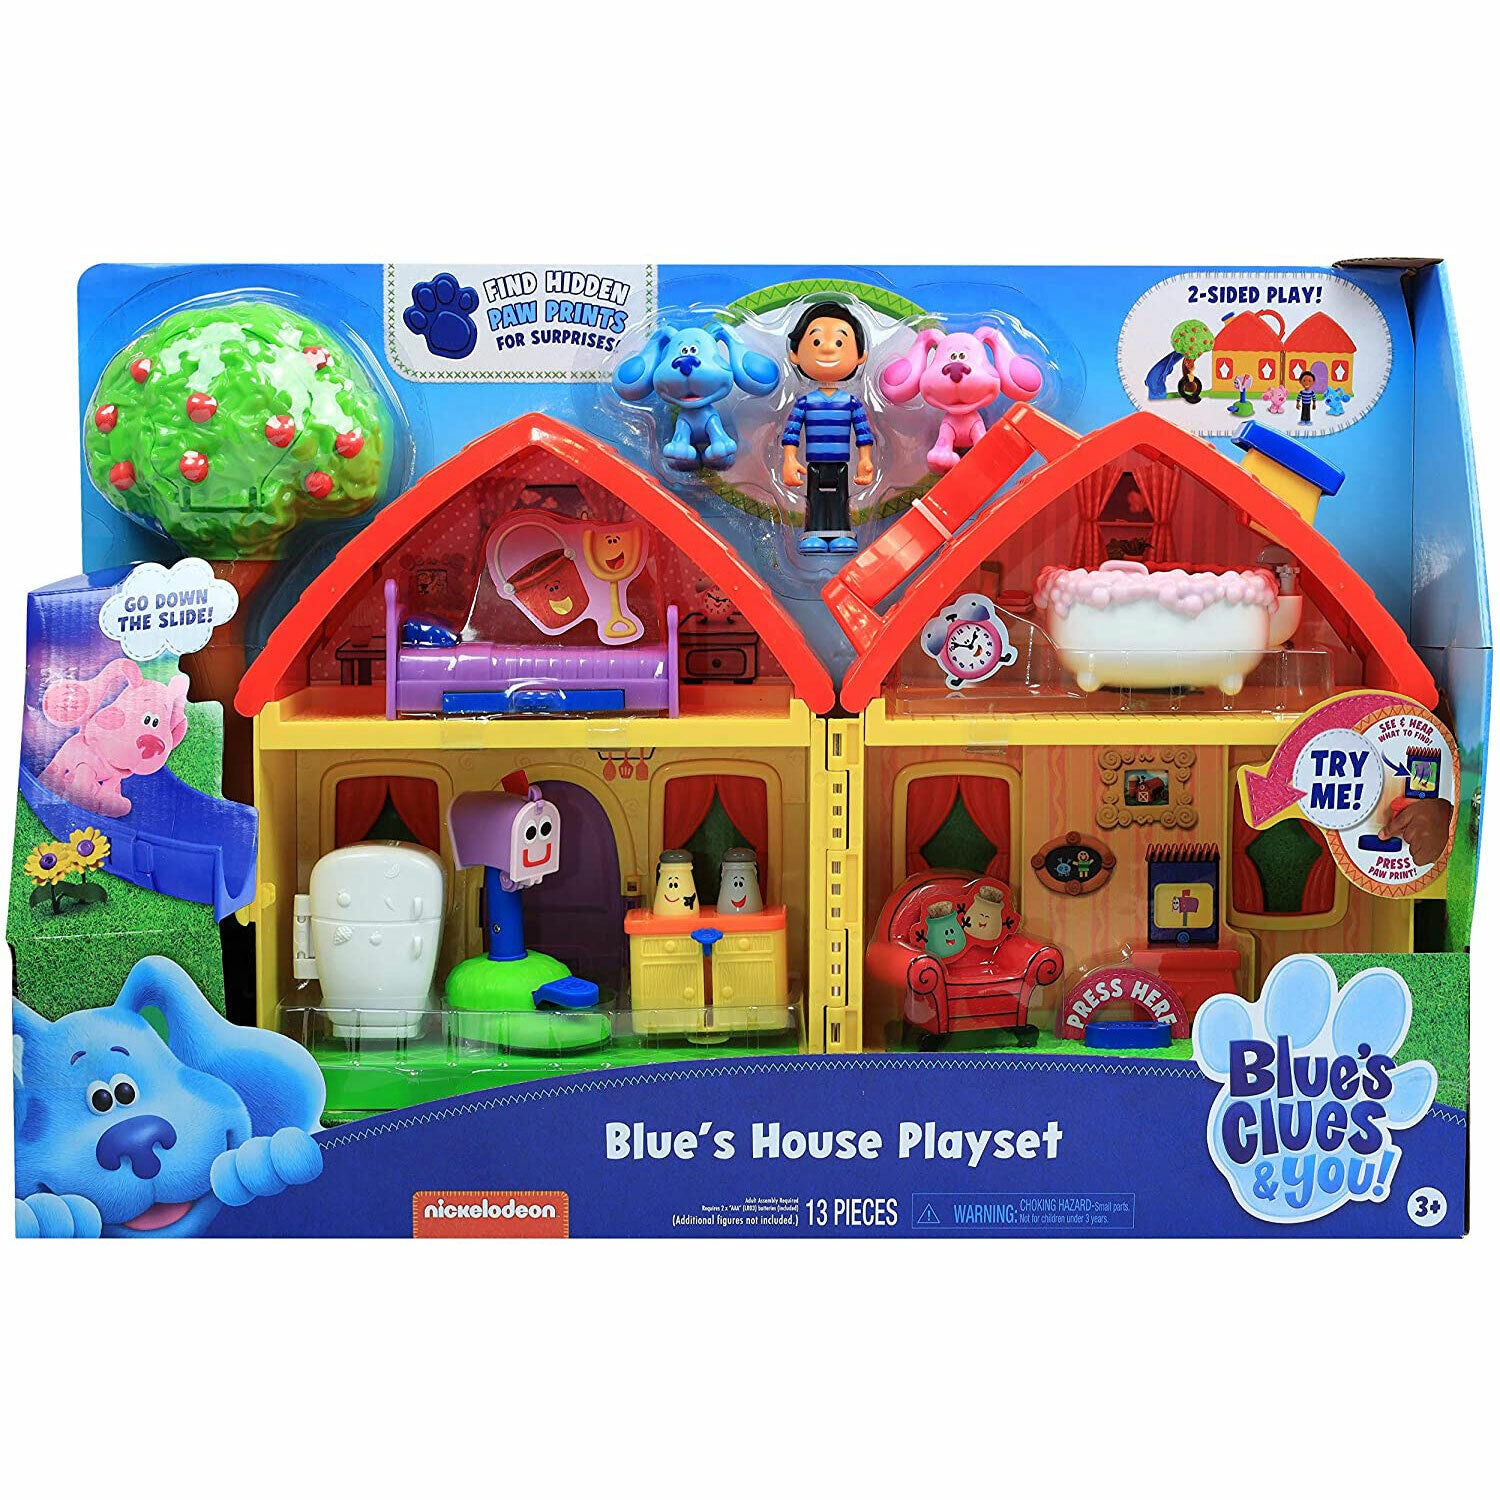 New Blue's Clues & You! Blue's House Playset - Fun for Kids!